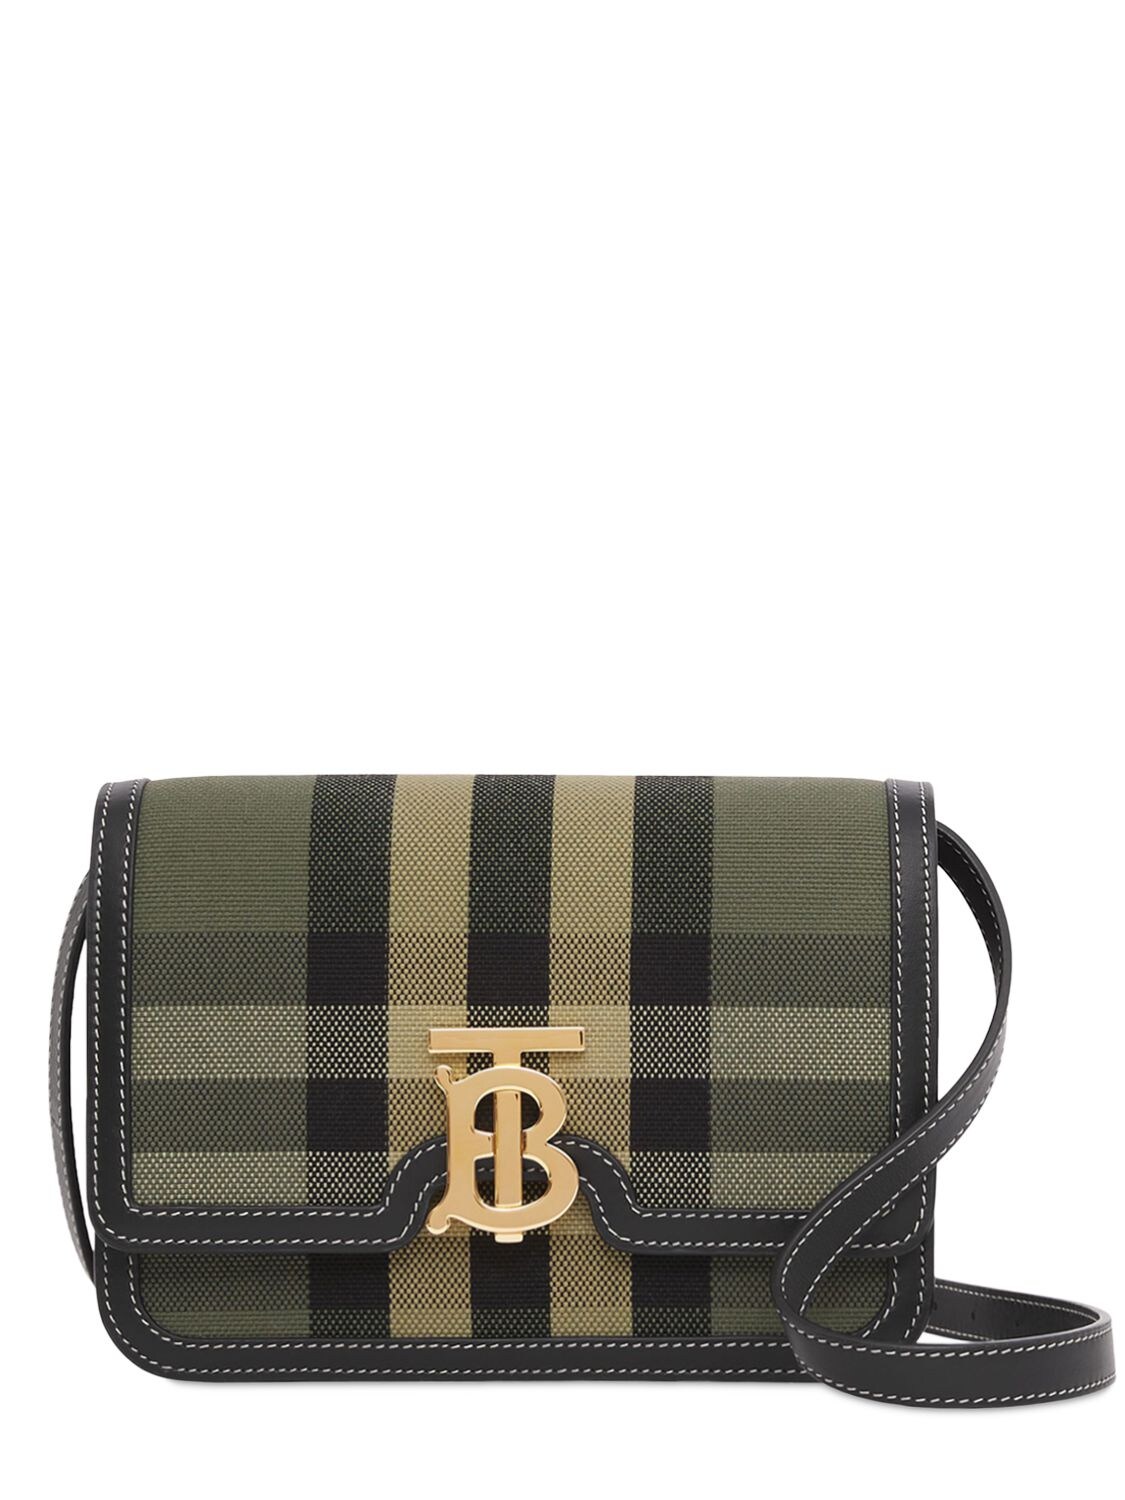 Burberry Small Canvas And Leather Tb Cross-body Bag in Natural